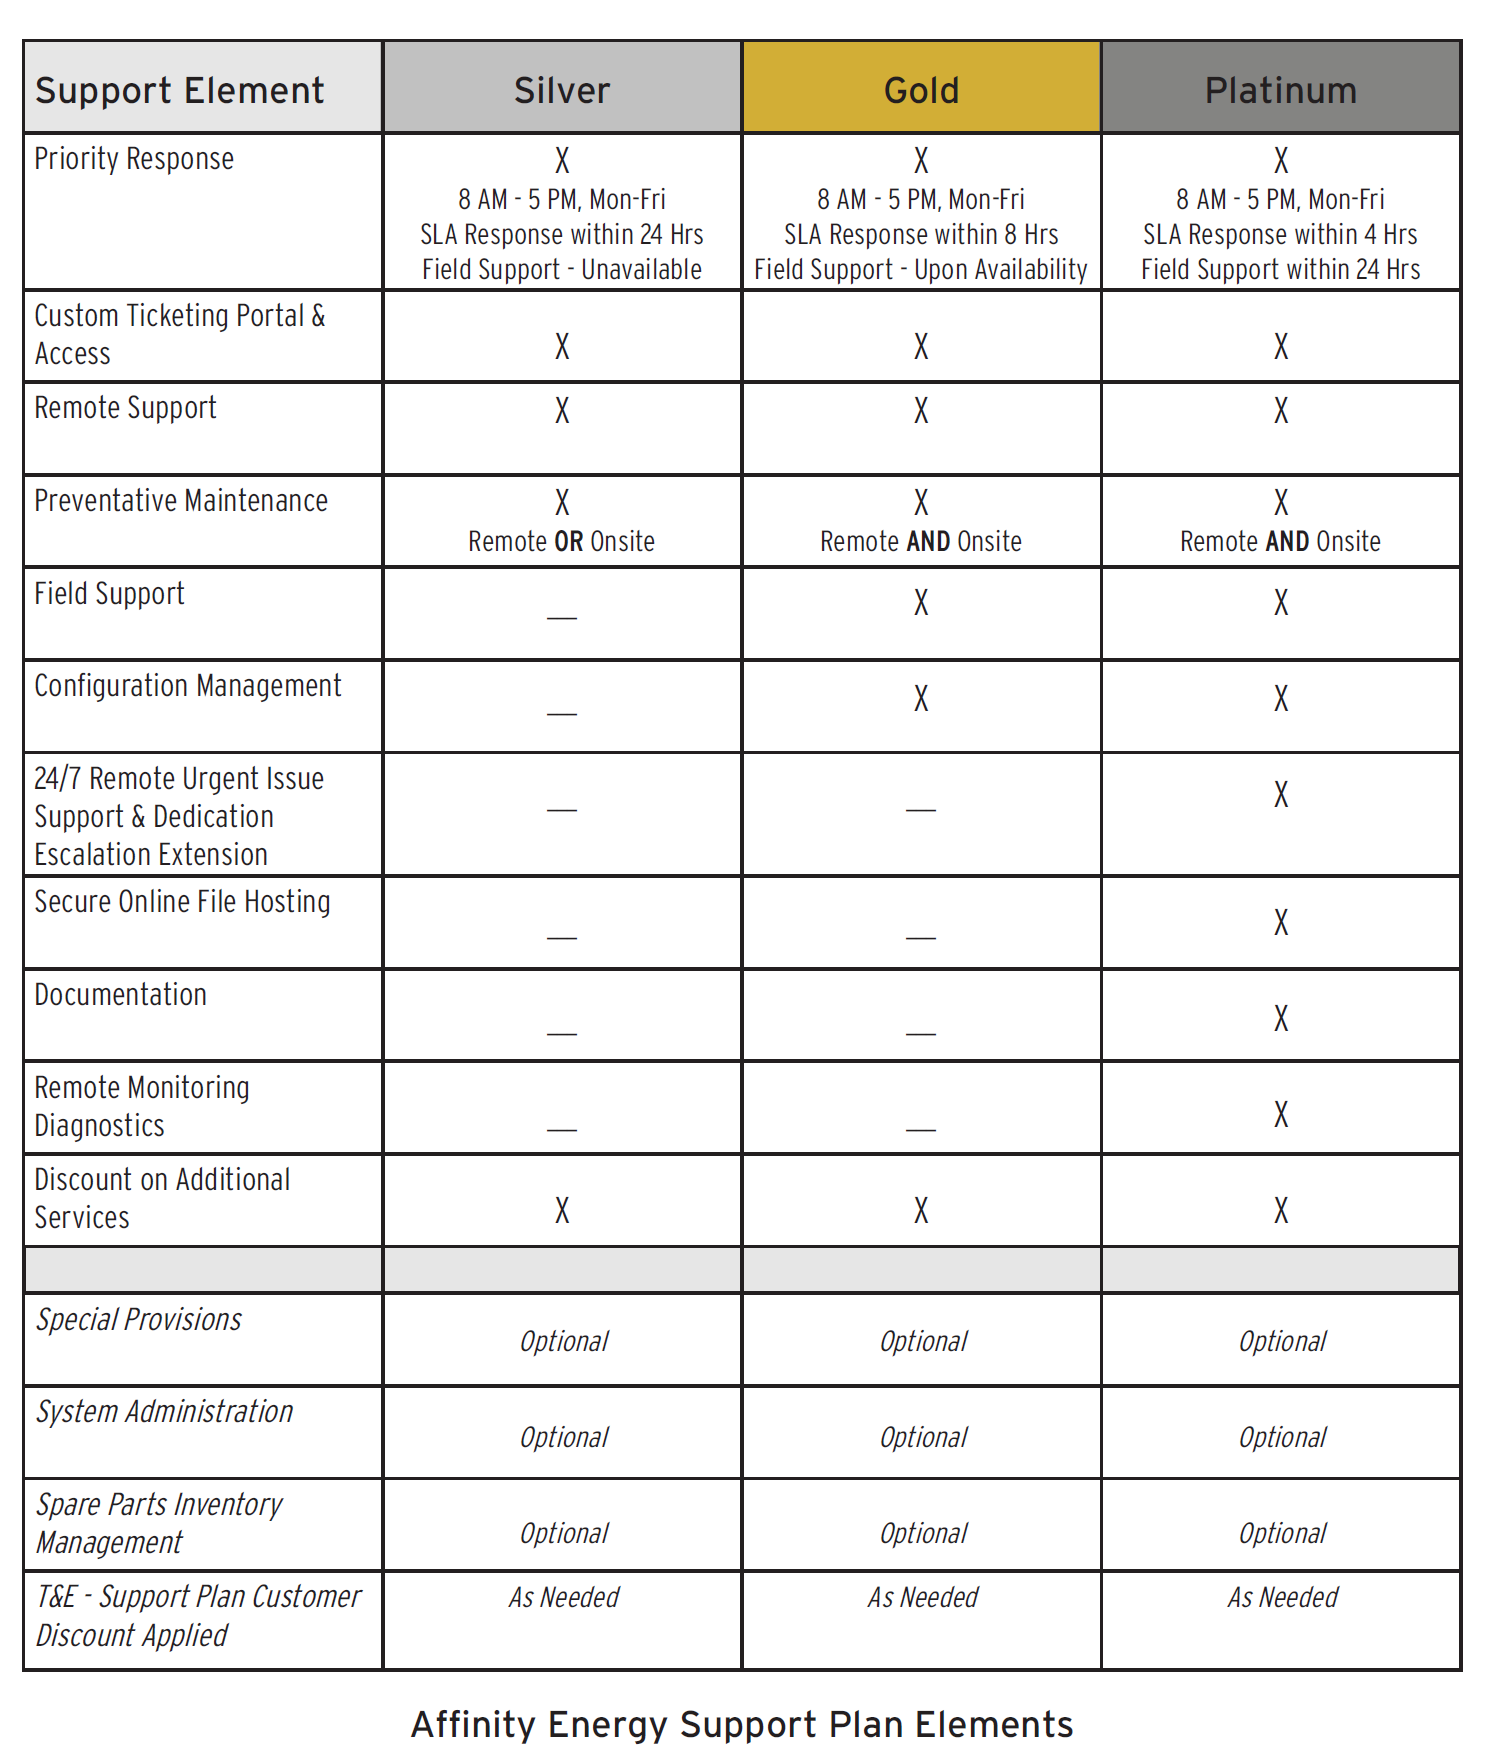 Table containing Affinity Energy's Support Plan elements